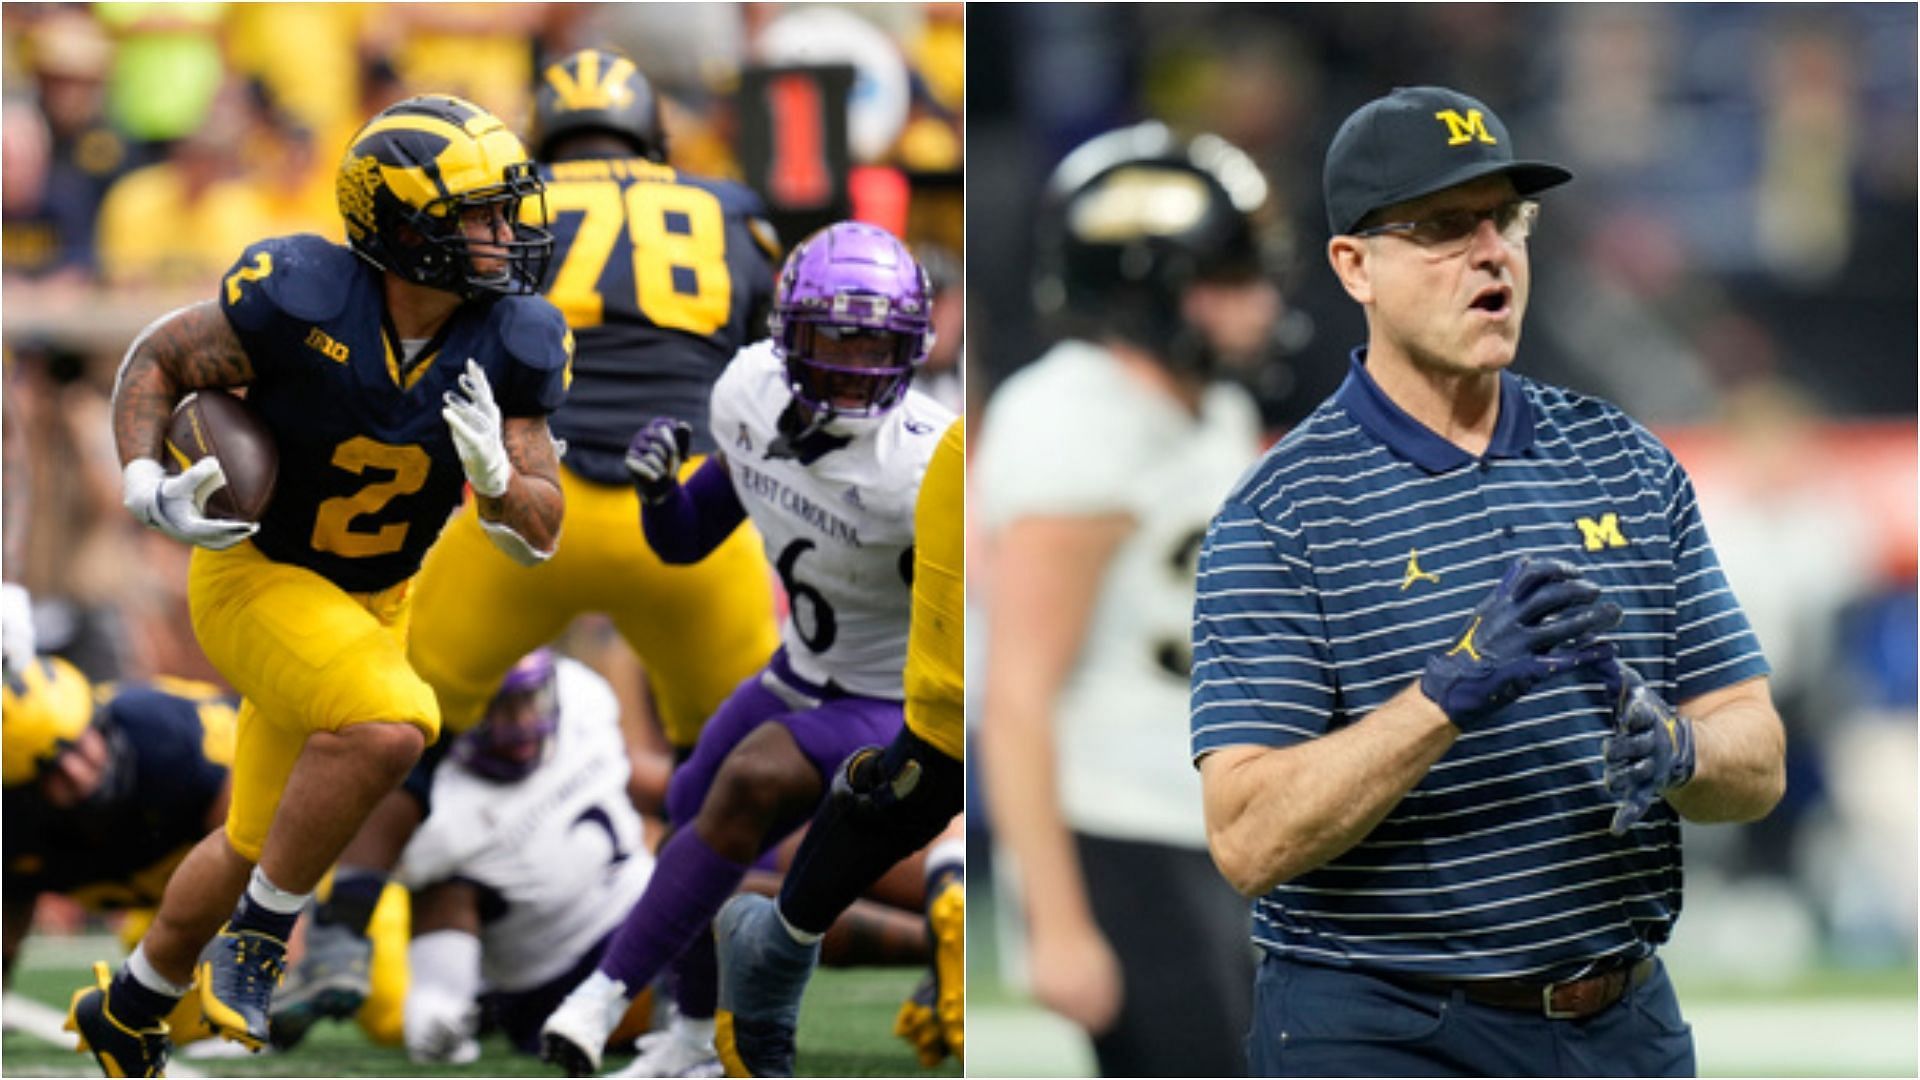 CFB Fans react to Michigan players gesturing a tribute to their coach Jim Harbaugh